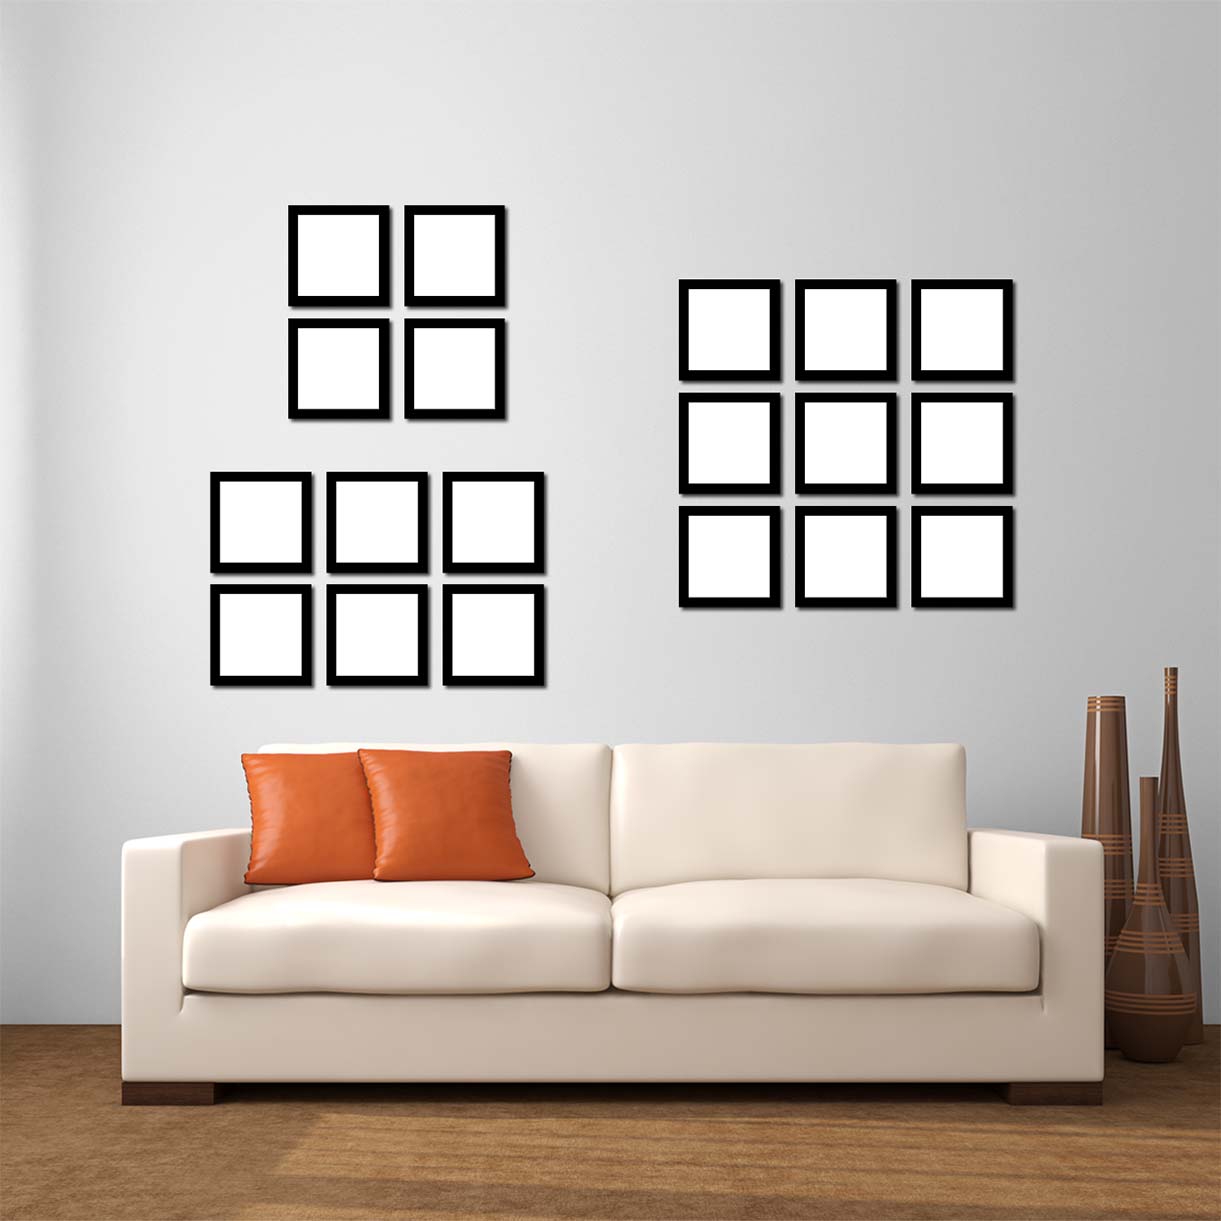 size-guide-photo-wall-frames